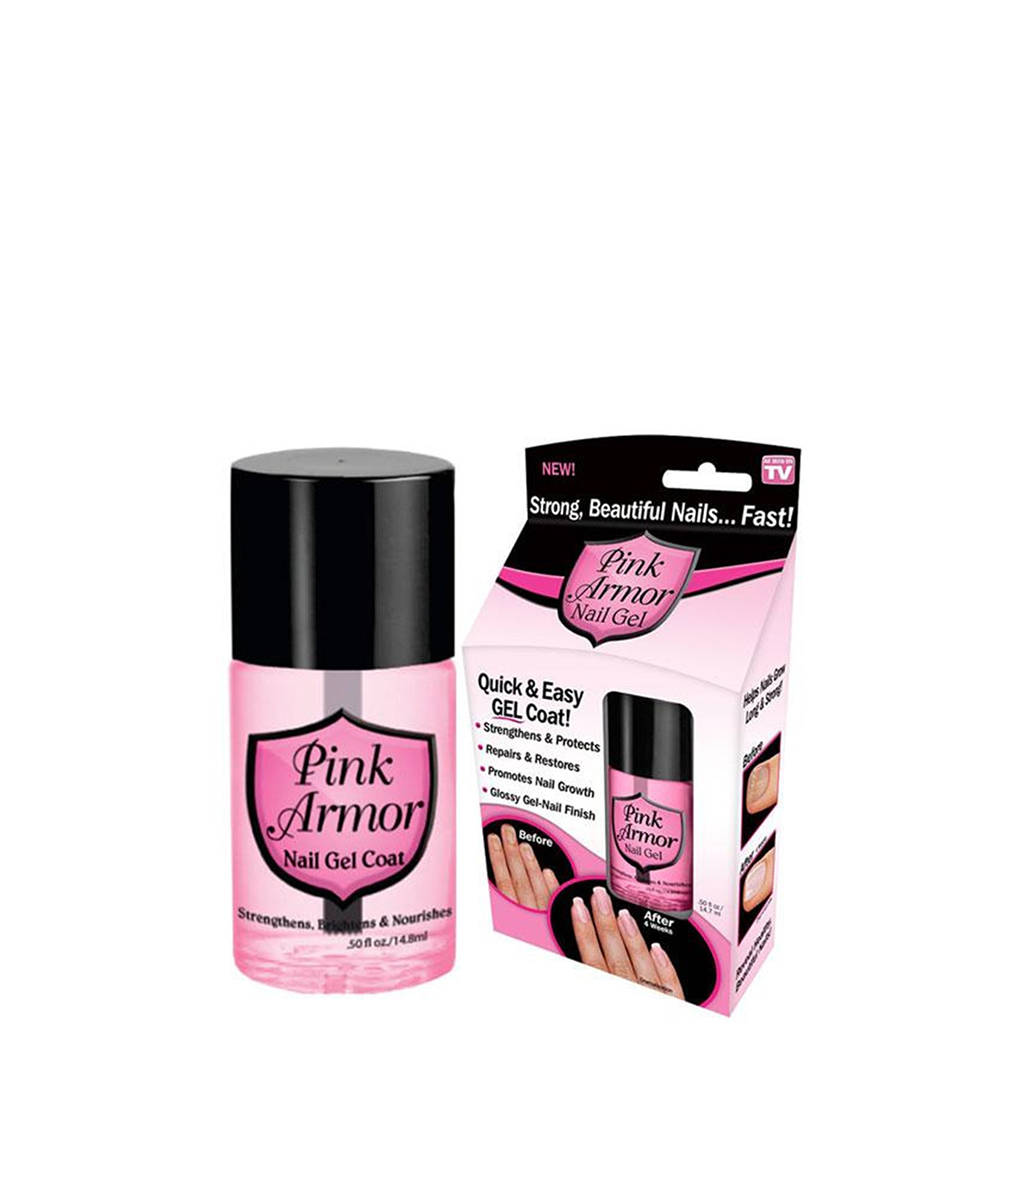 Pink Armor Nail Gel - Not sold in stores